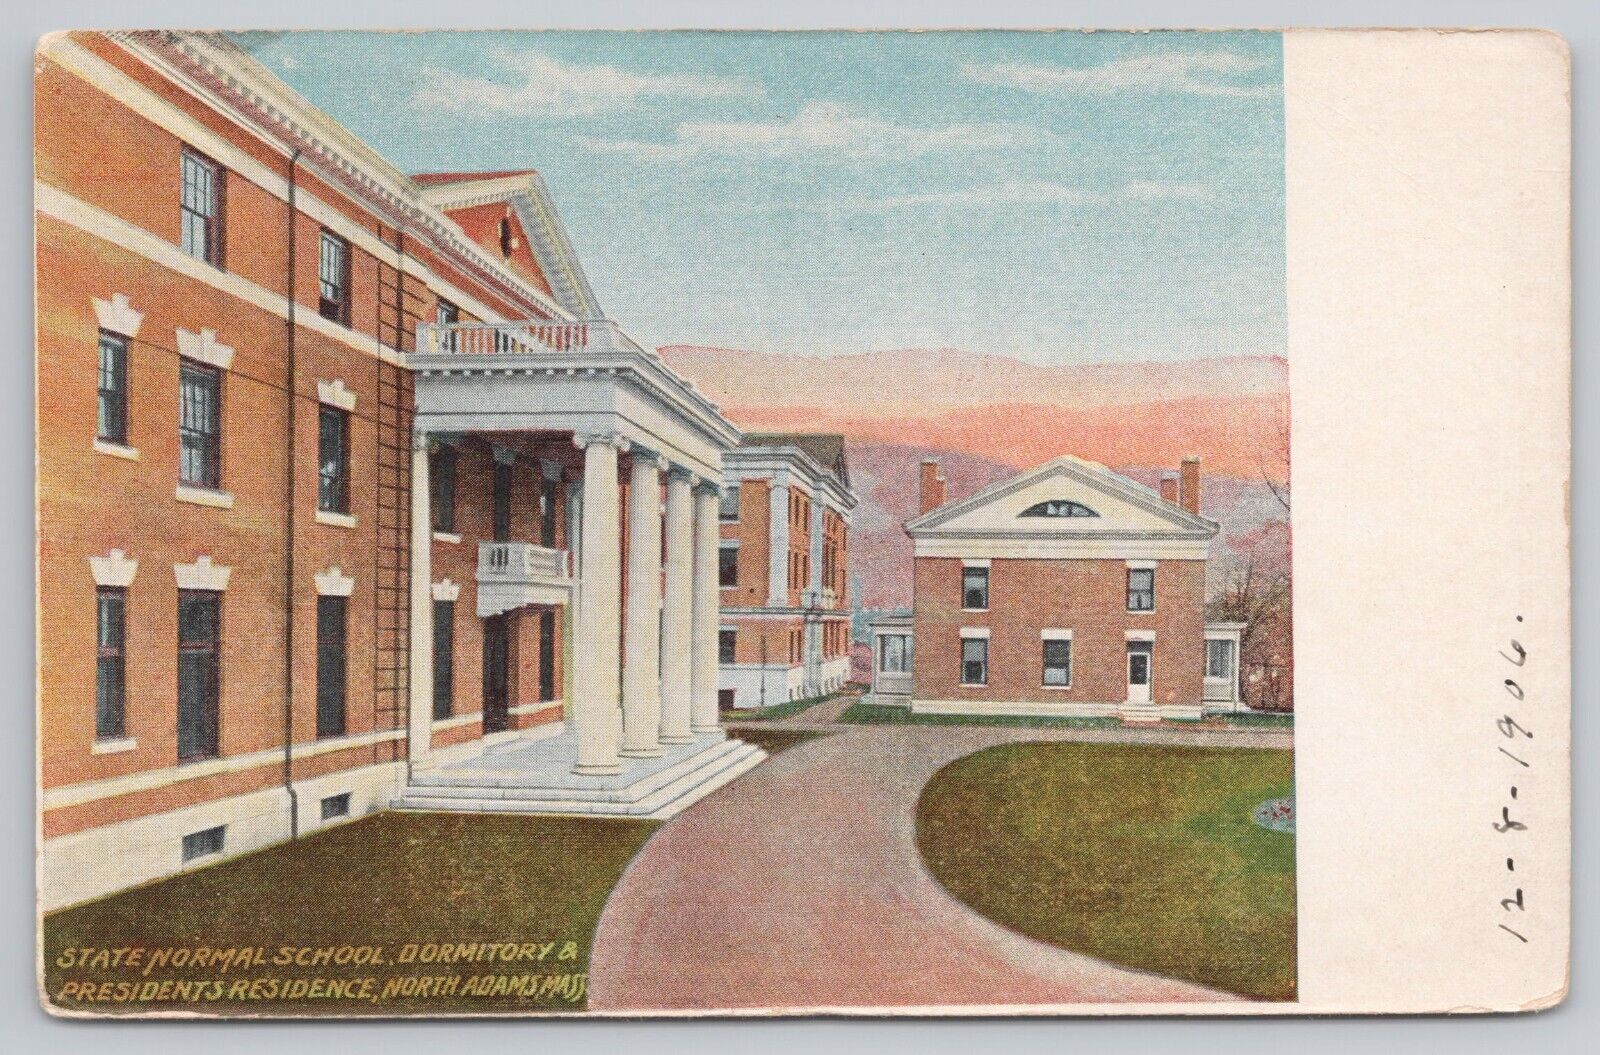 Postcard State Normal School Dormitory & Presidents Residence North Adams Mass